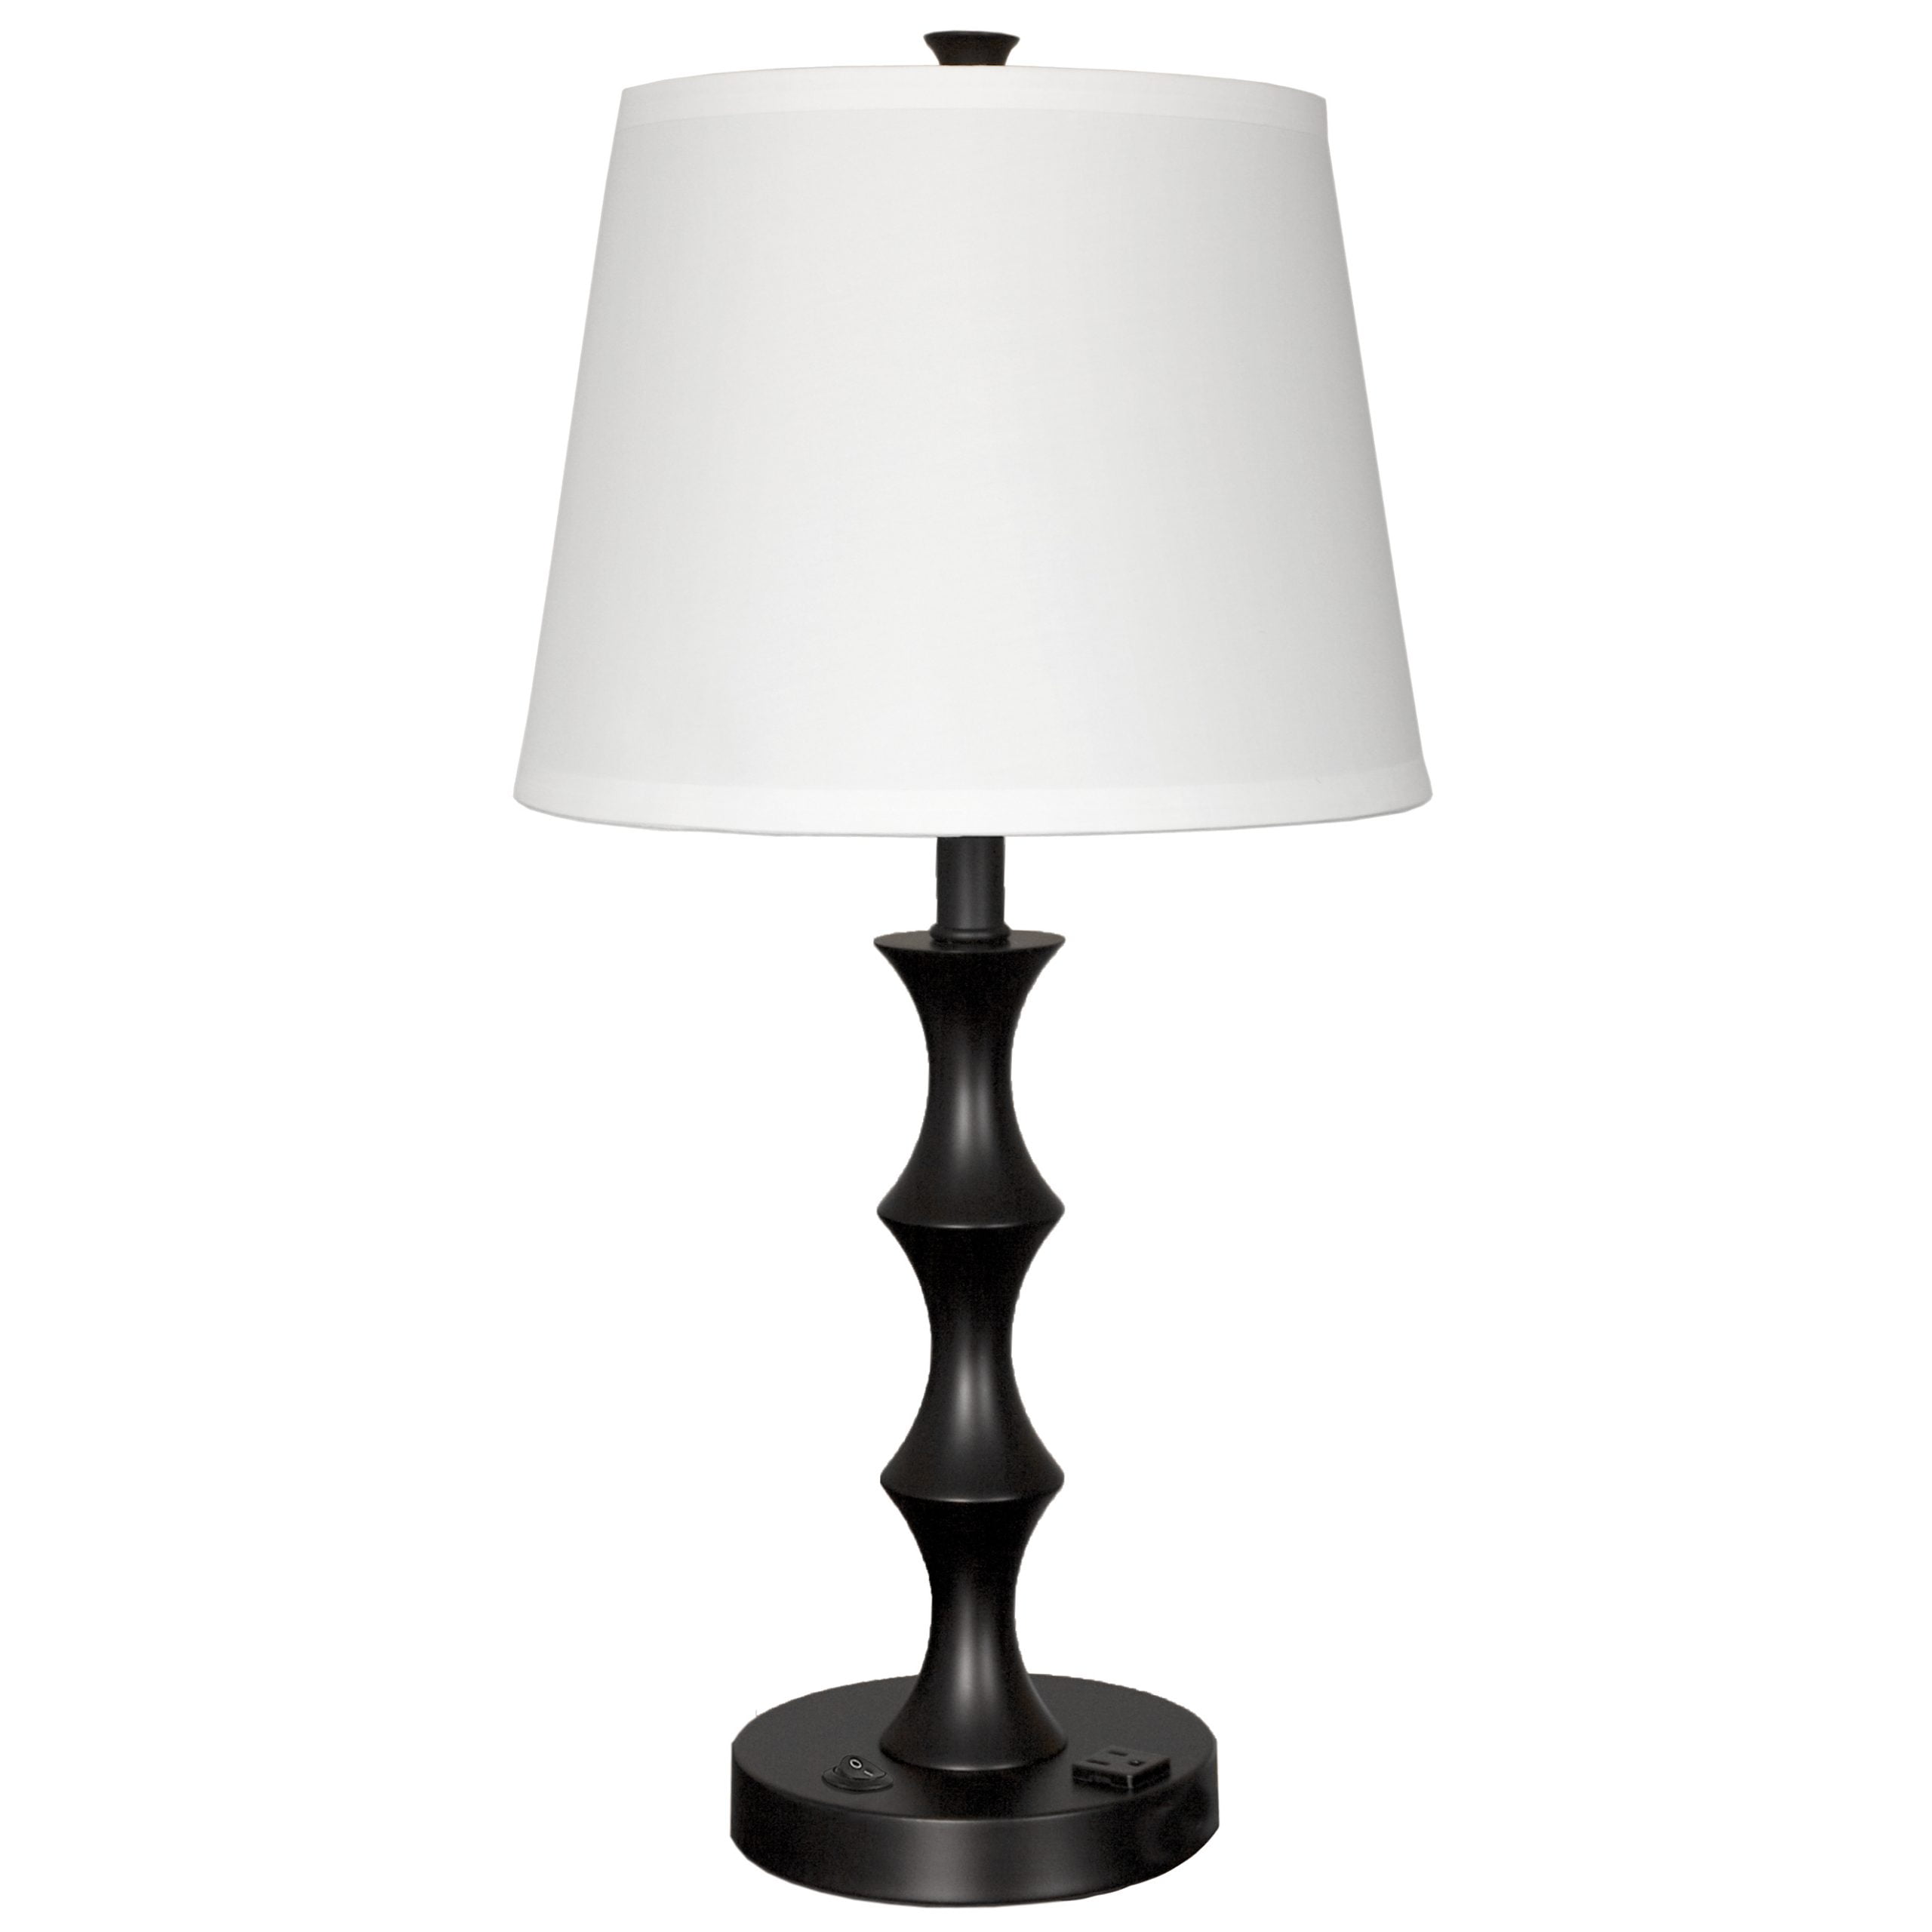 Urban End Table Lamp with 1 Outlet